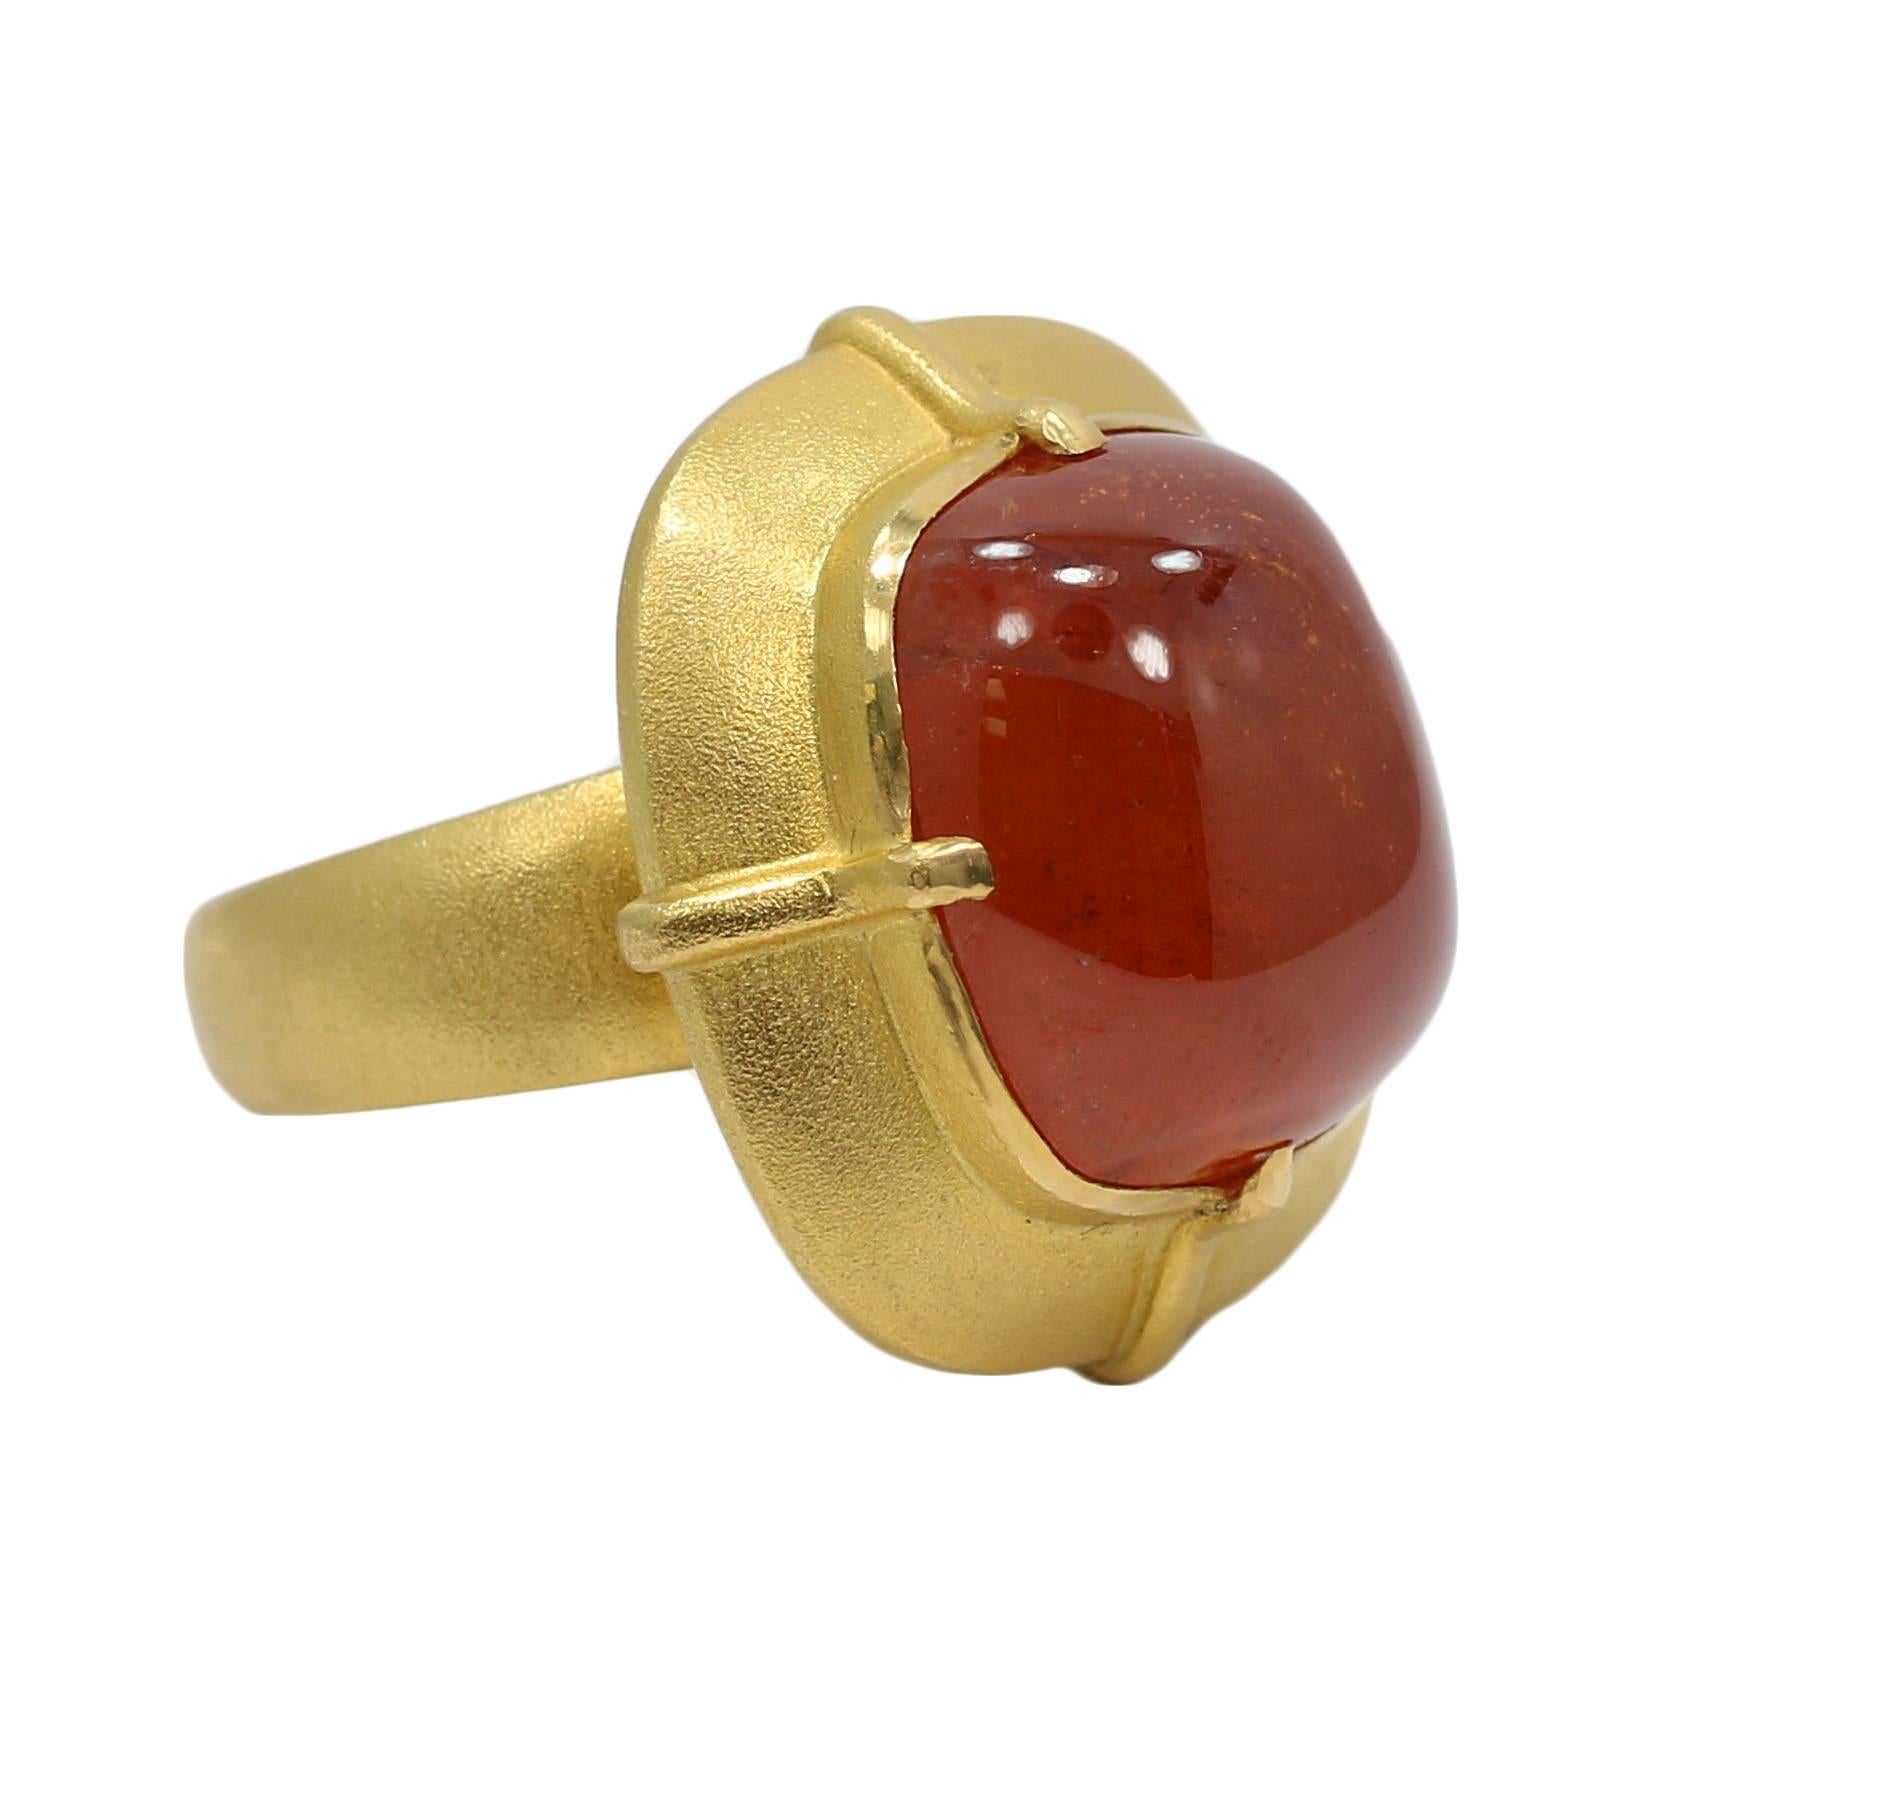 We have this C.Tyler 22k yellow gold mandarin garnet (cayan collection) ring. It measures 1.25" in height and weighs a total of 16.5 grams. The ring sits at a size 6.25 and can be adjusted. The ring is in great condition. Please see all